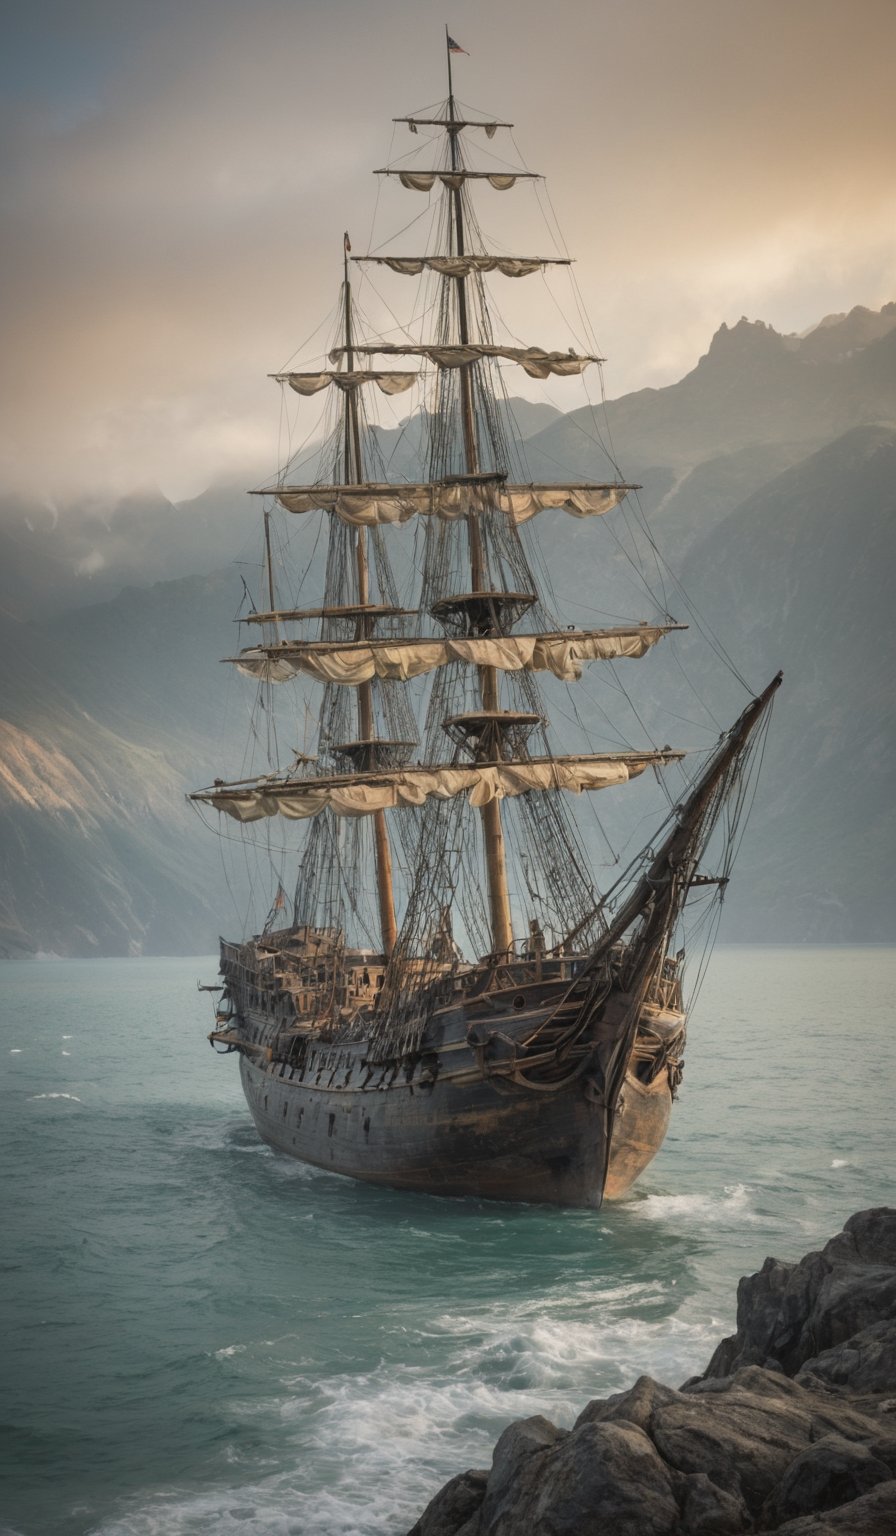 A weathered pirate ship with sails-of-the-line, worn and weary from years at sea, dominates the frame. Dirt-covered equipment and tattered sails stained white with grime hang limply, as a breathtaking sunset casts gentle shadows behind the vessel, imbuing the scene with an ethereal ambiance. Soft hues of blue, gray, and green predominate, punctuated by rusty orange-yellows and teal accents on the ship's worn features. The background transitions seamlessly from the sharp focus on the ship to a loose, impressionistic mountainscape, shrouded in mist. Muted brushstrokes add depth and movement, while hazy lighting creates a dystopian atmosphere.